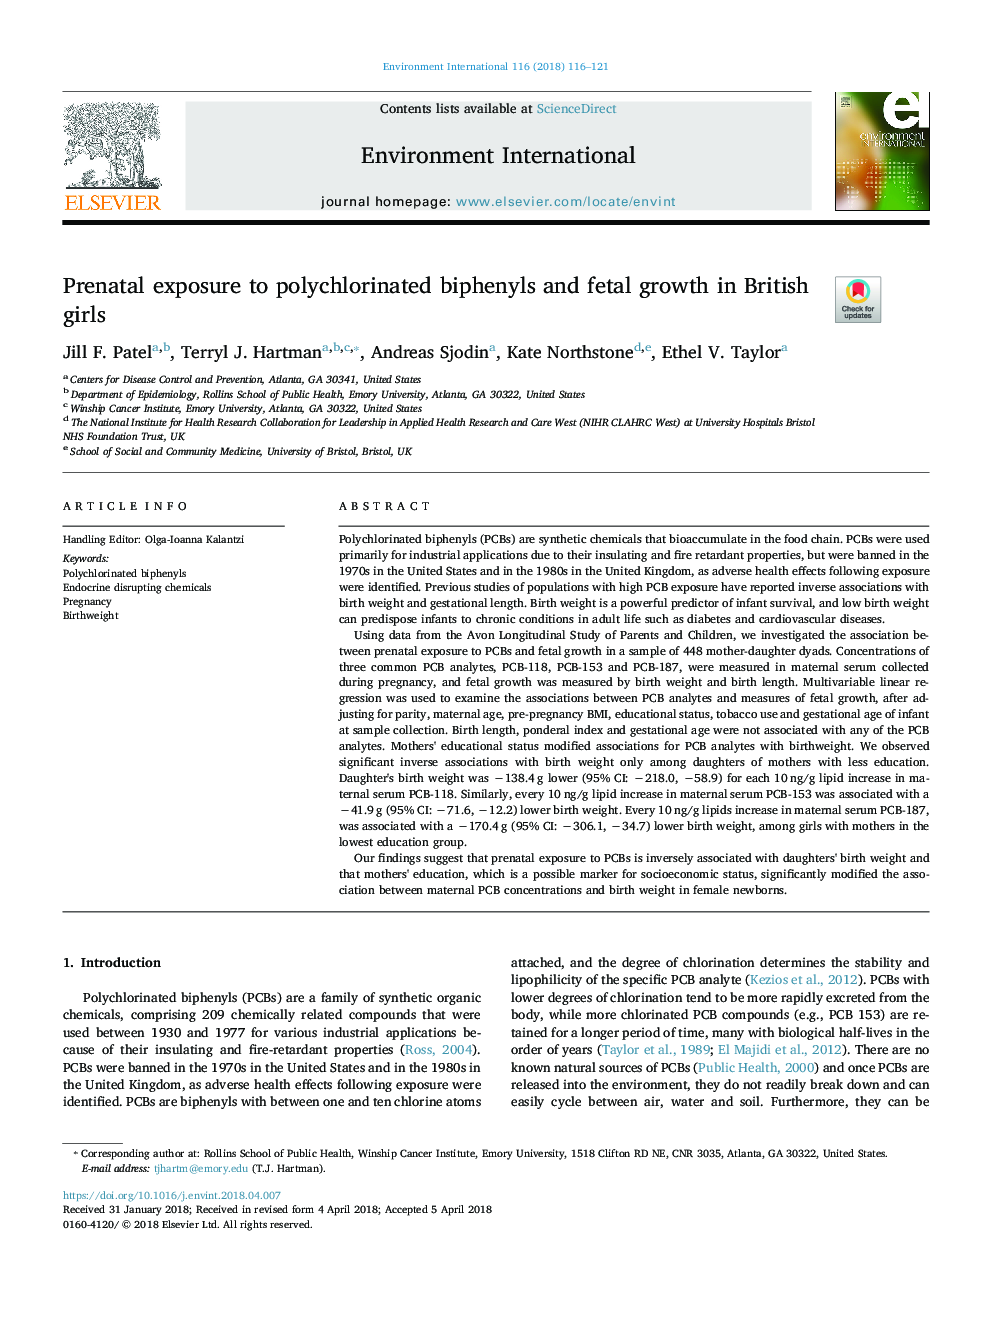 Prenatal exposure to polychlorinated biphenyls and fetal growth in British girls